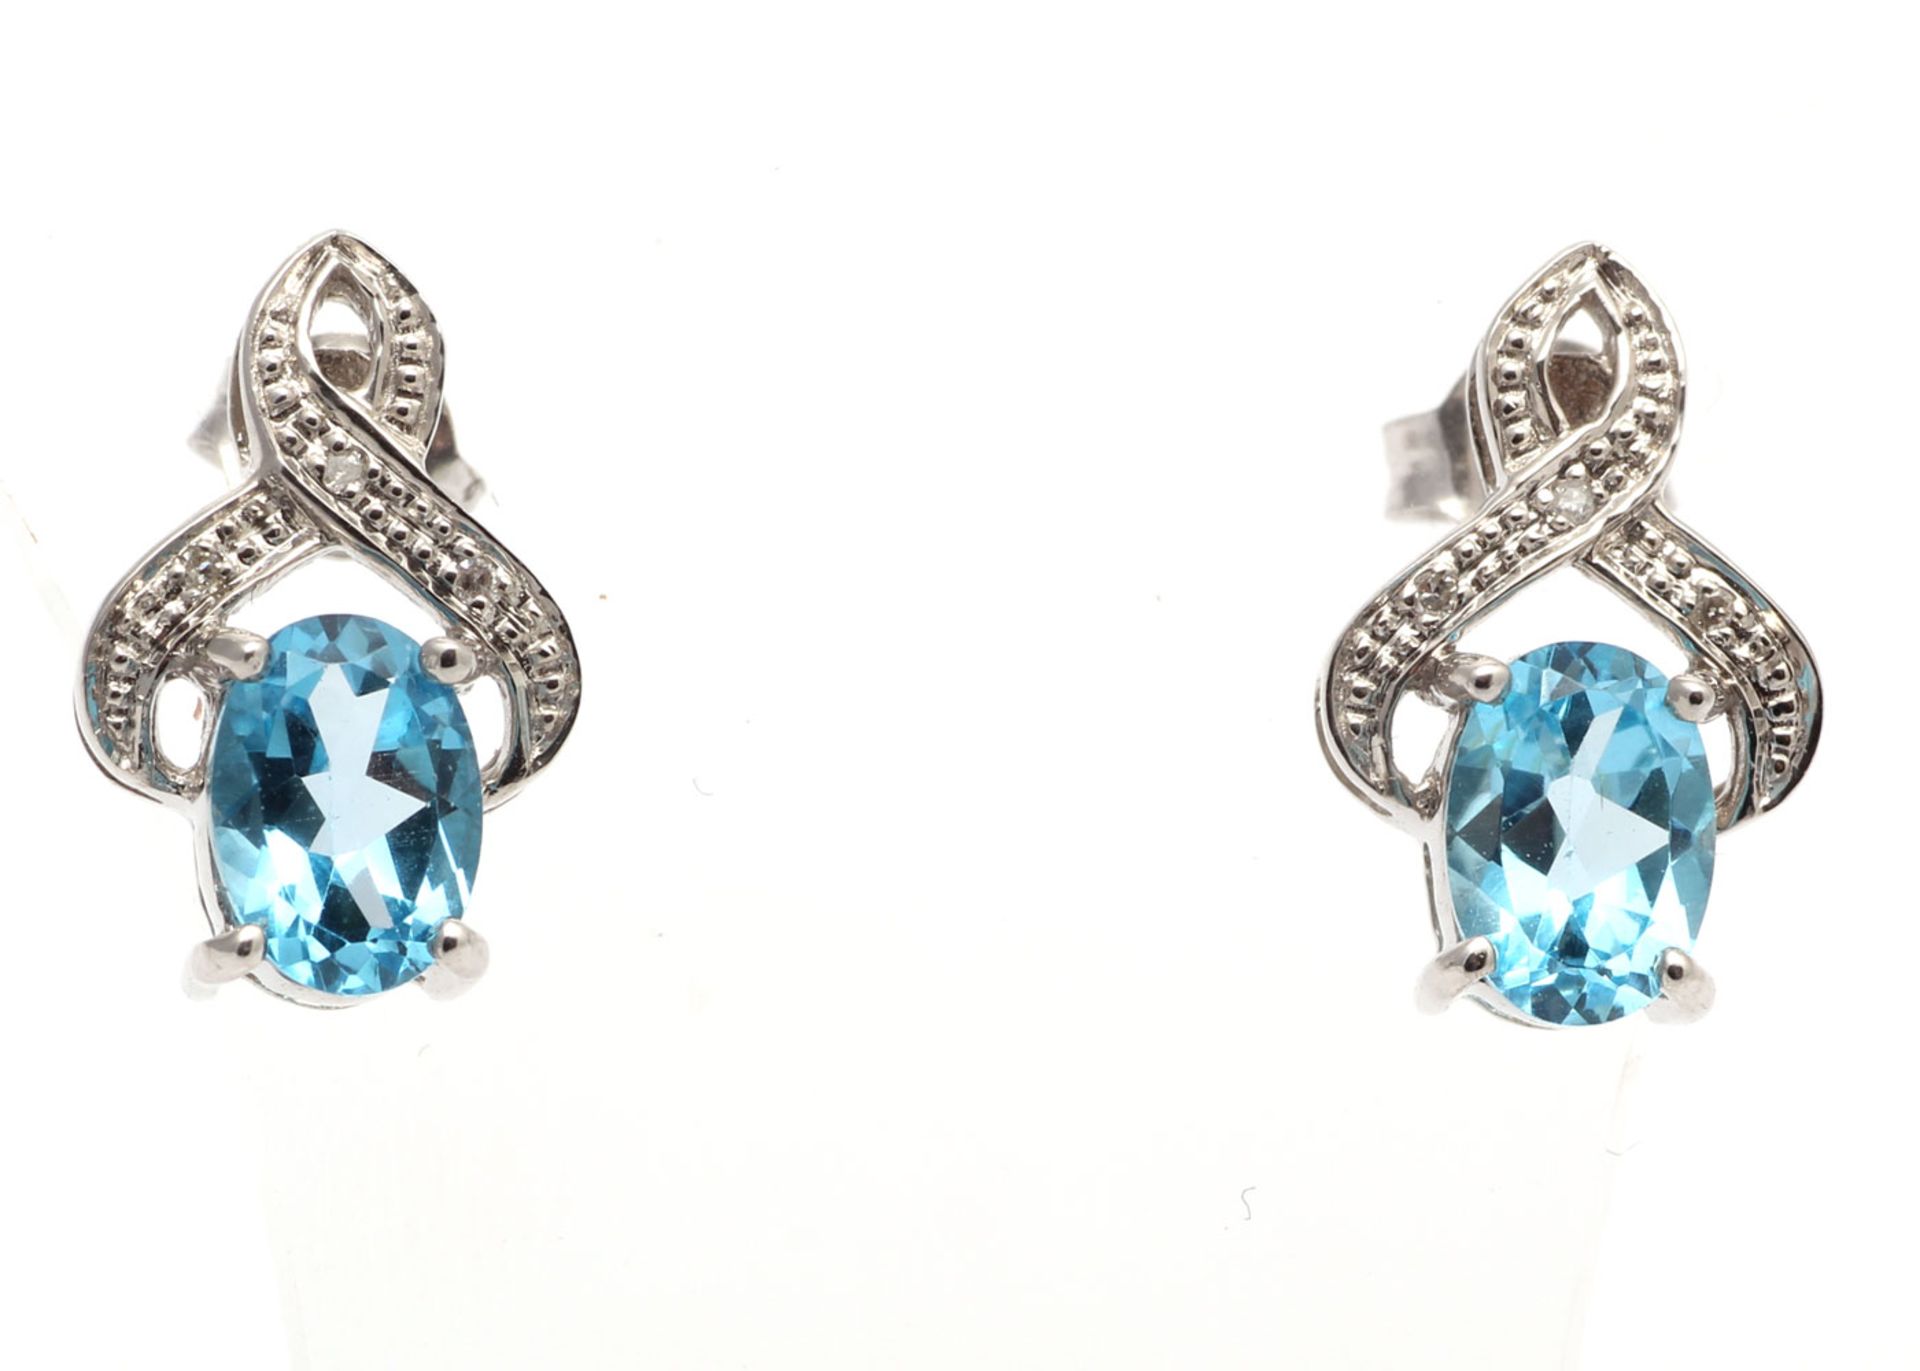 9ct White Gold Diamond And Blue Topaz Earrings - Valued By GIE £950.00 - A beautiful oval shaped